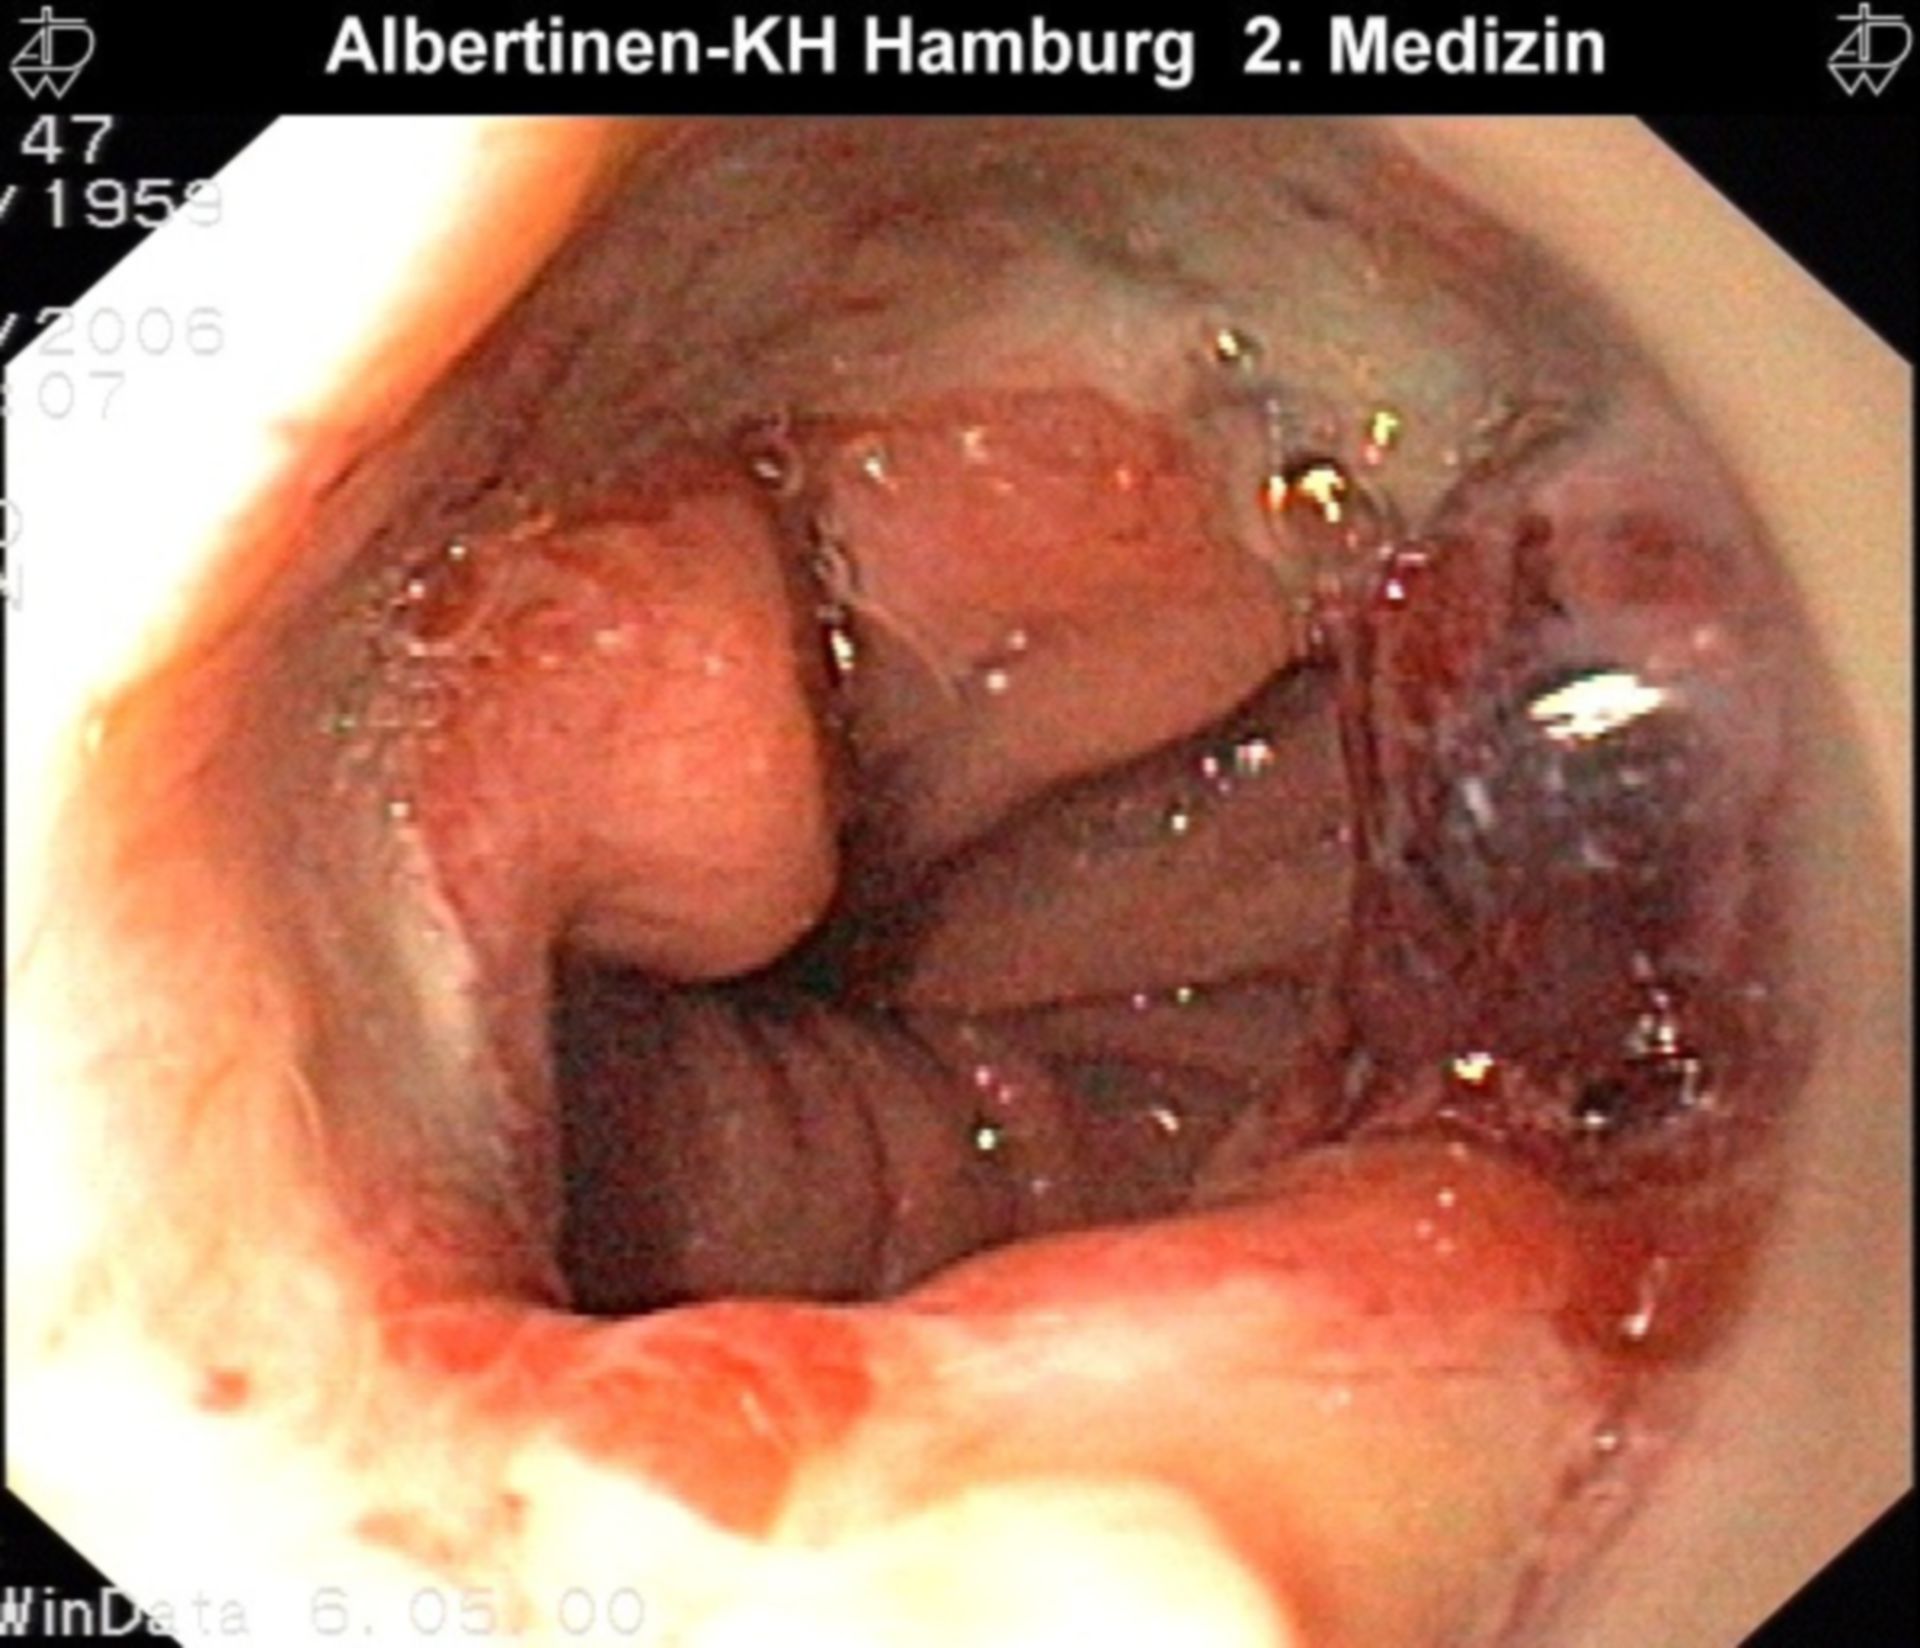 Ulcer in esophageal and stomach junction